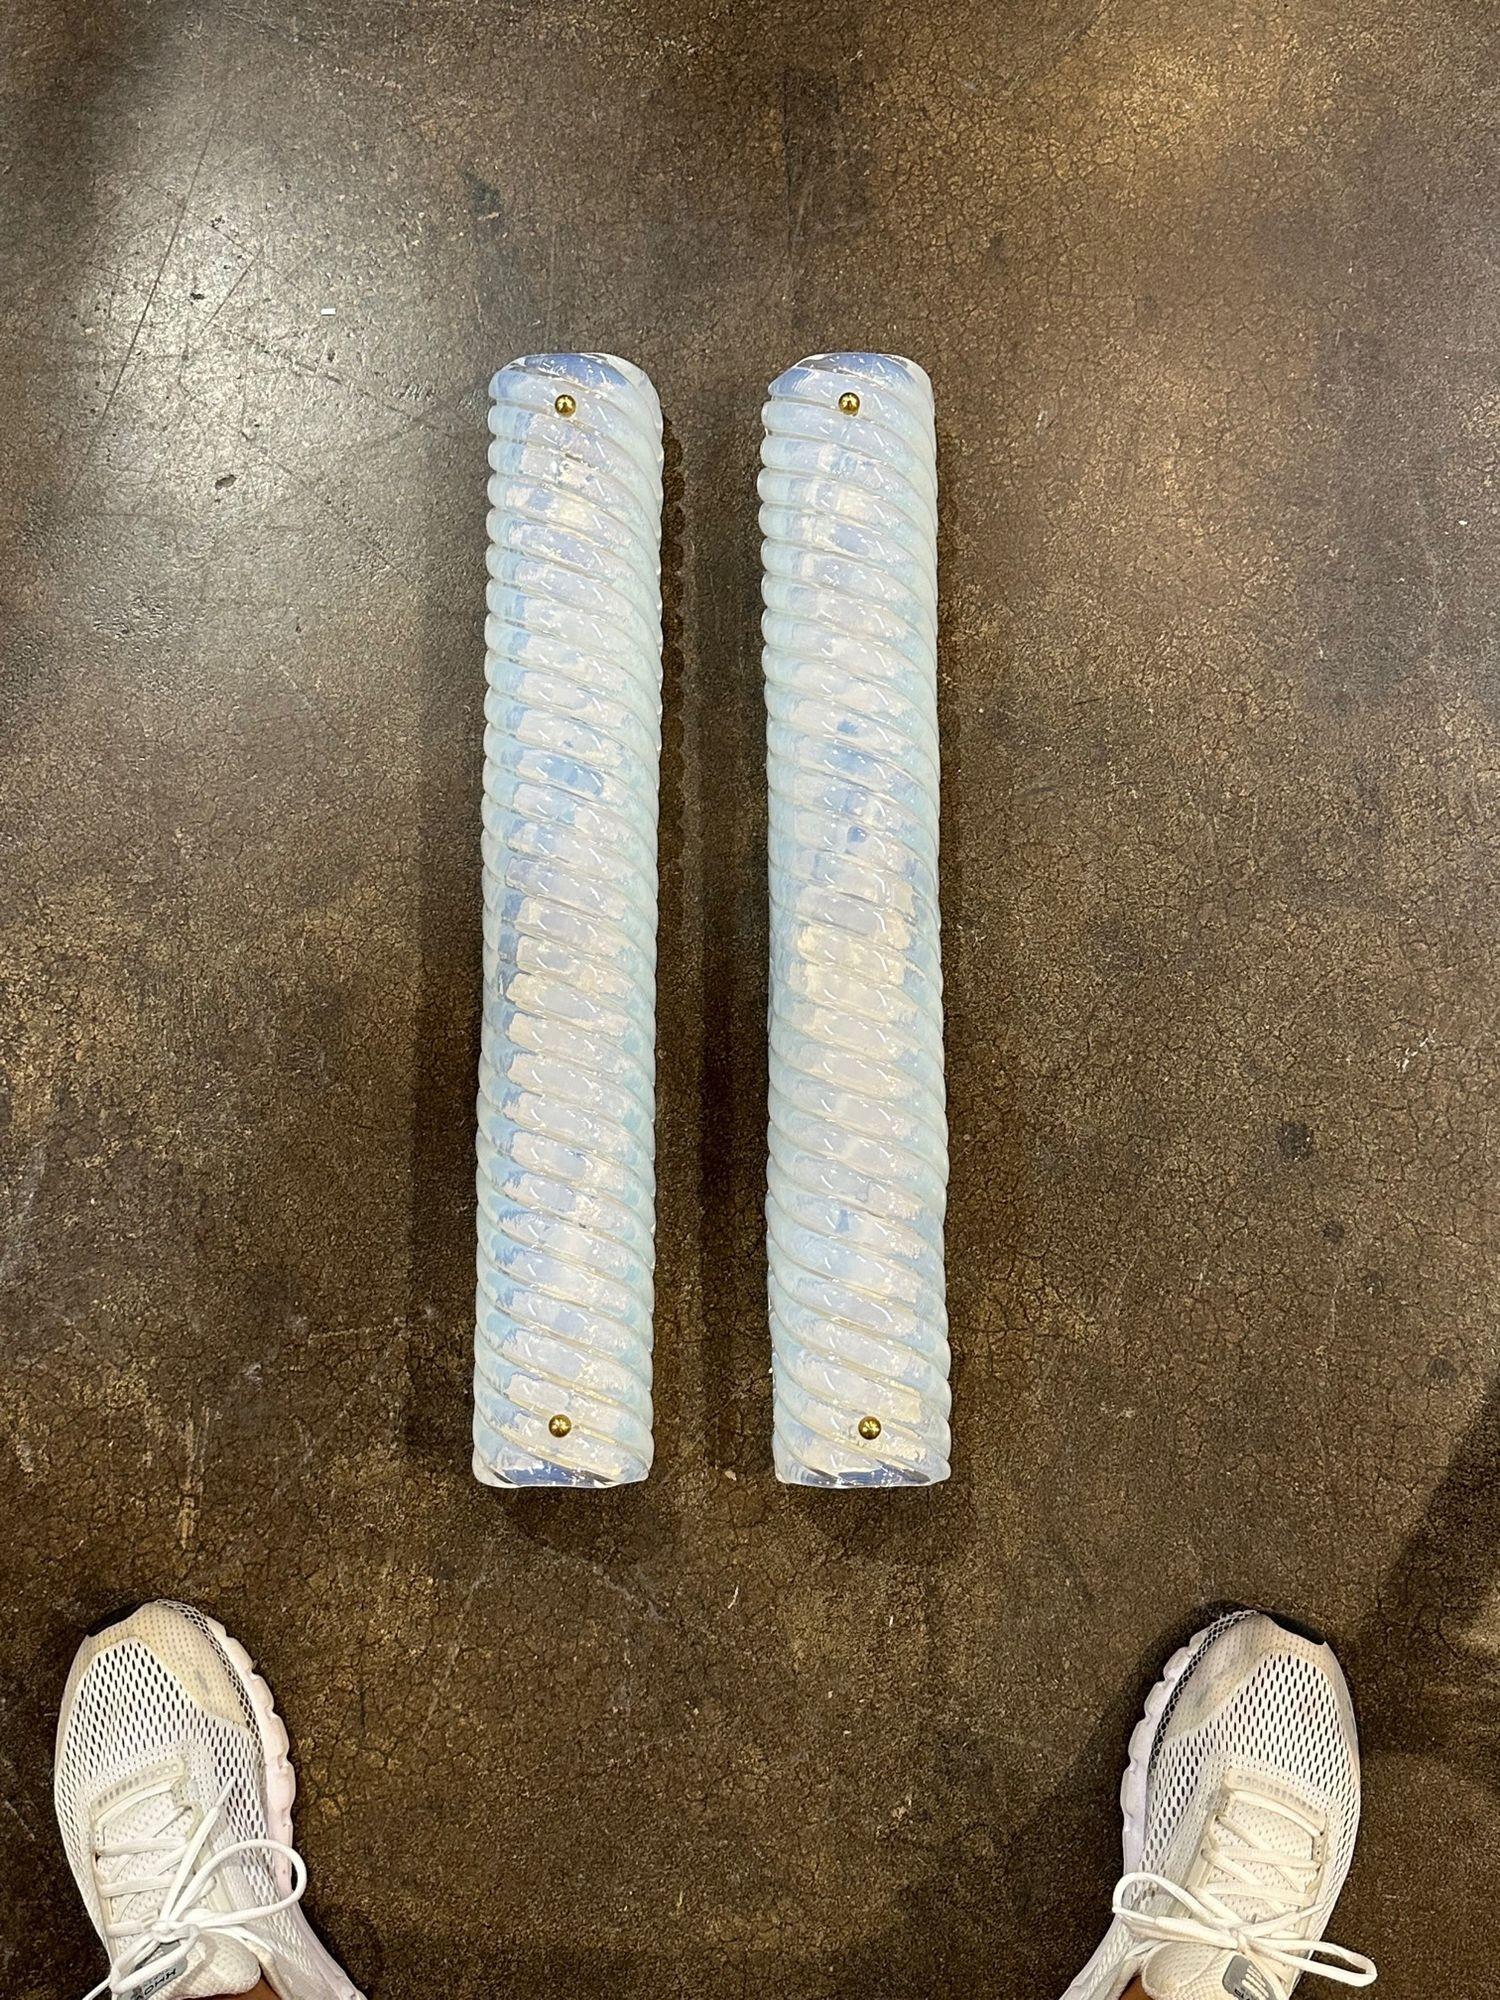 Pair of modern Murano opaline glass swirl tube form sconces. Circa 2000. The sconces have been professionally rewired and ready to hang. A timeless and classic touch for a fine interior.